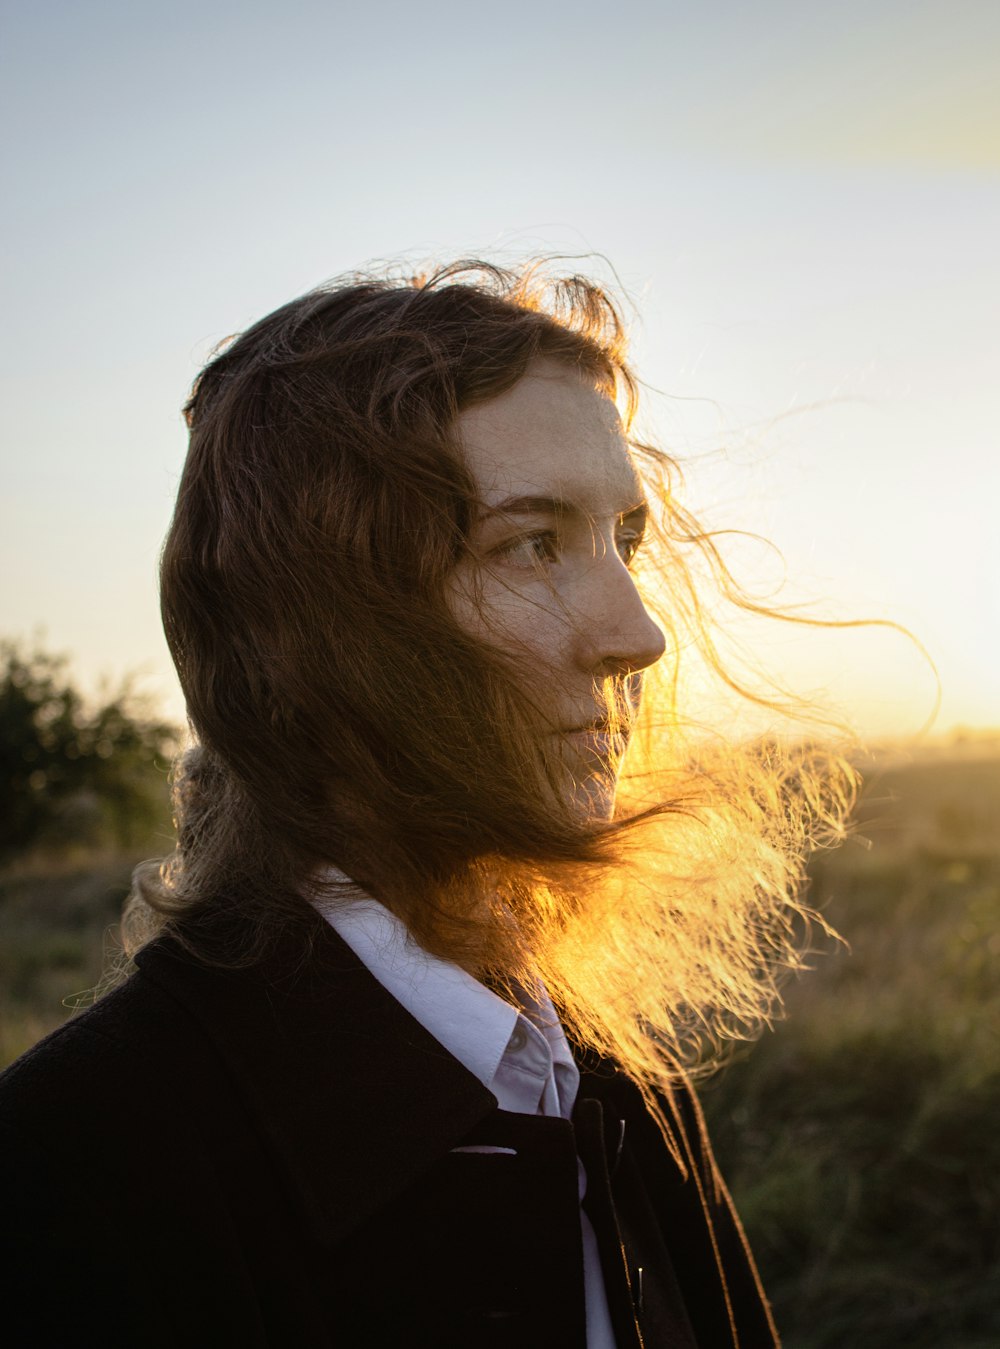 a man with long hair standing in a field